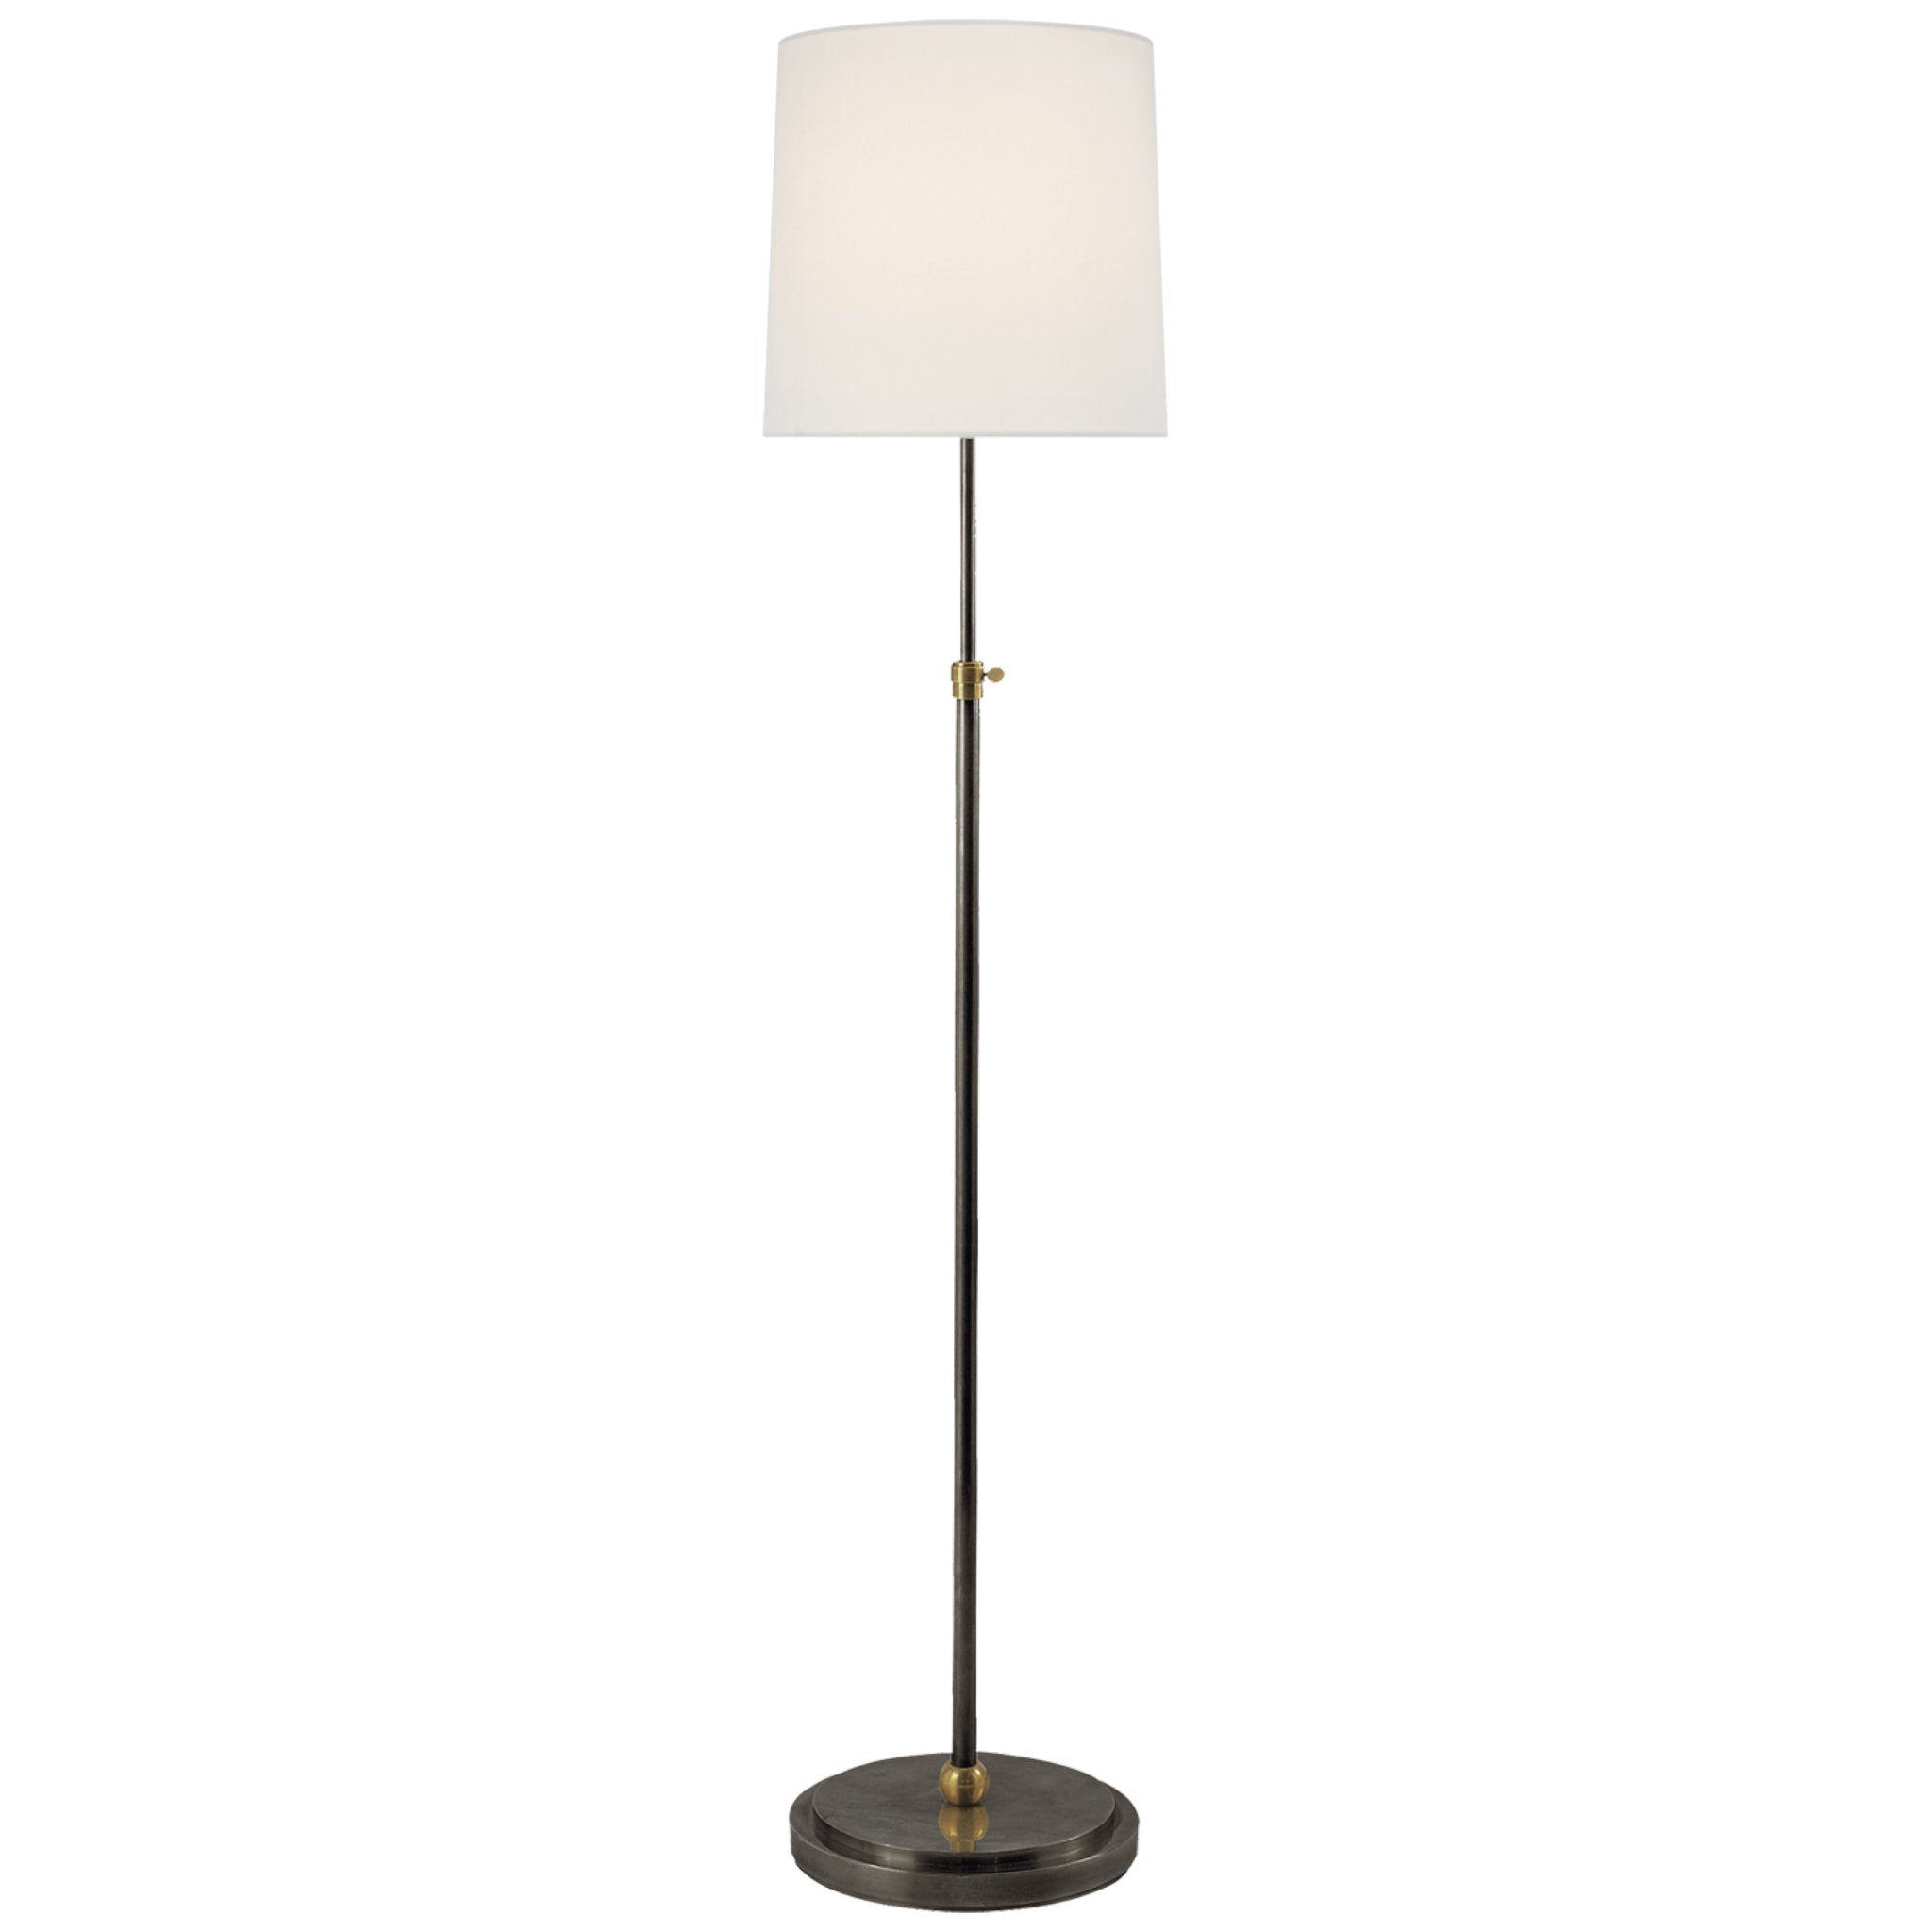 Thomas O'Brien Bryant Floor Lamp in Bronze and Hand-Rubbed Antique Brass with Linen Shade